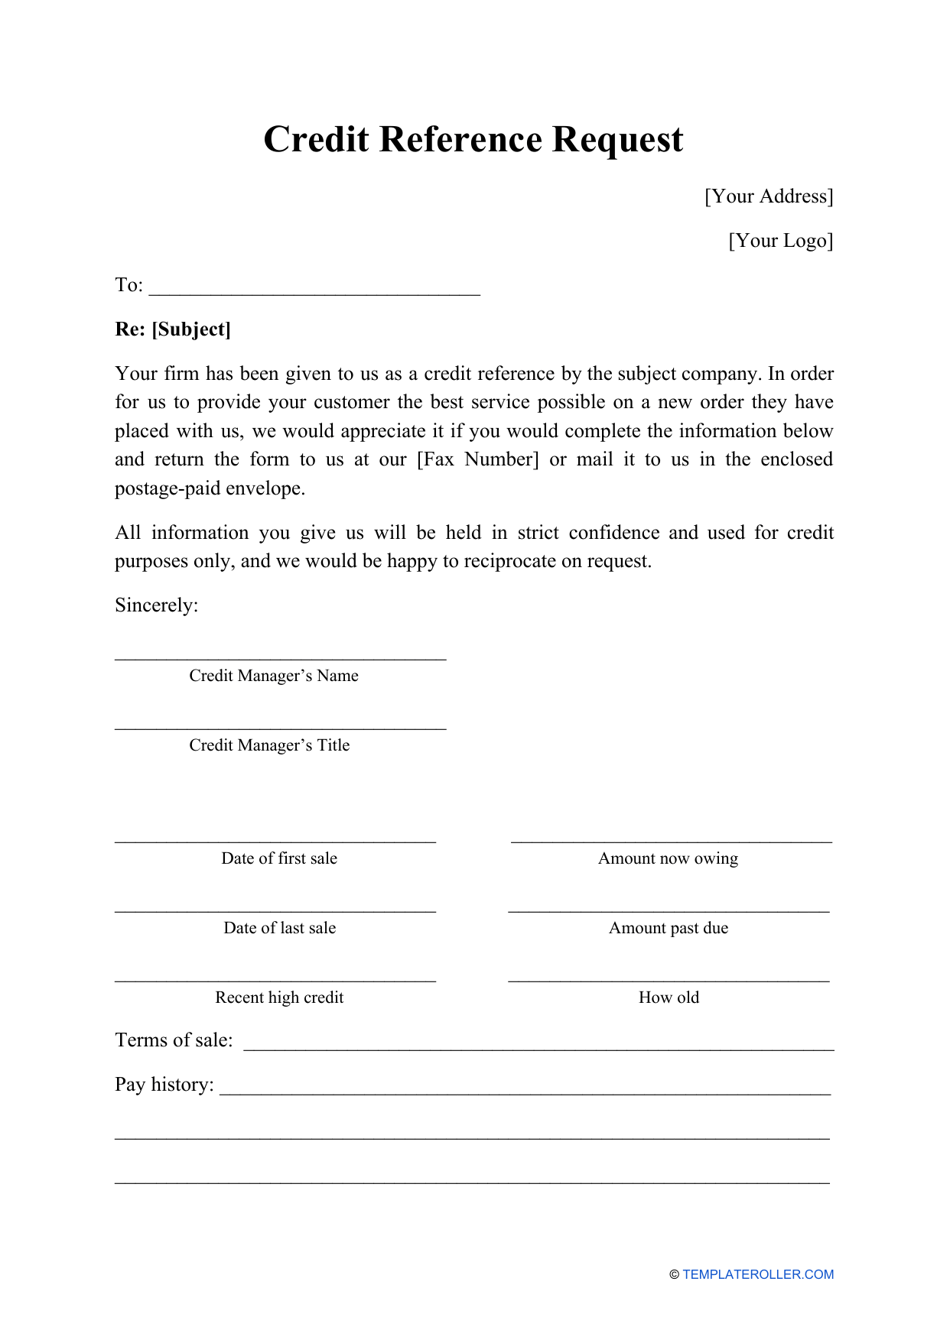 Credit Reference Request Form, Page 1